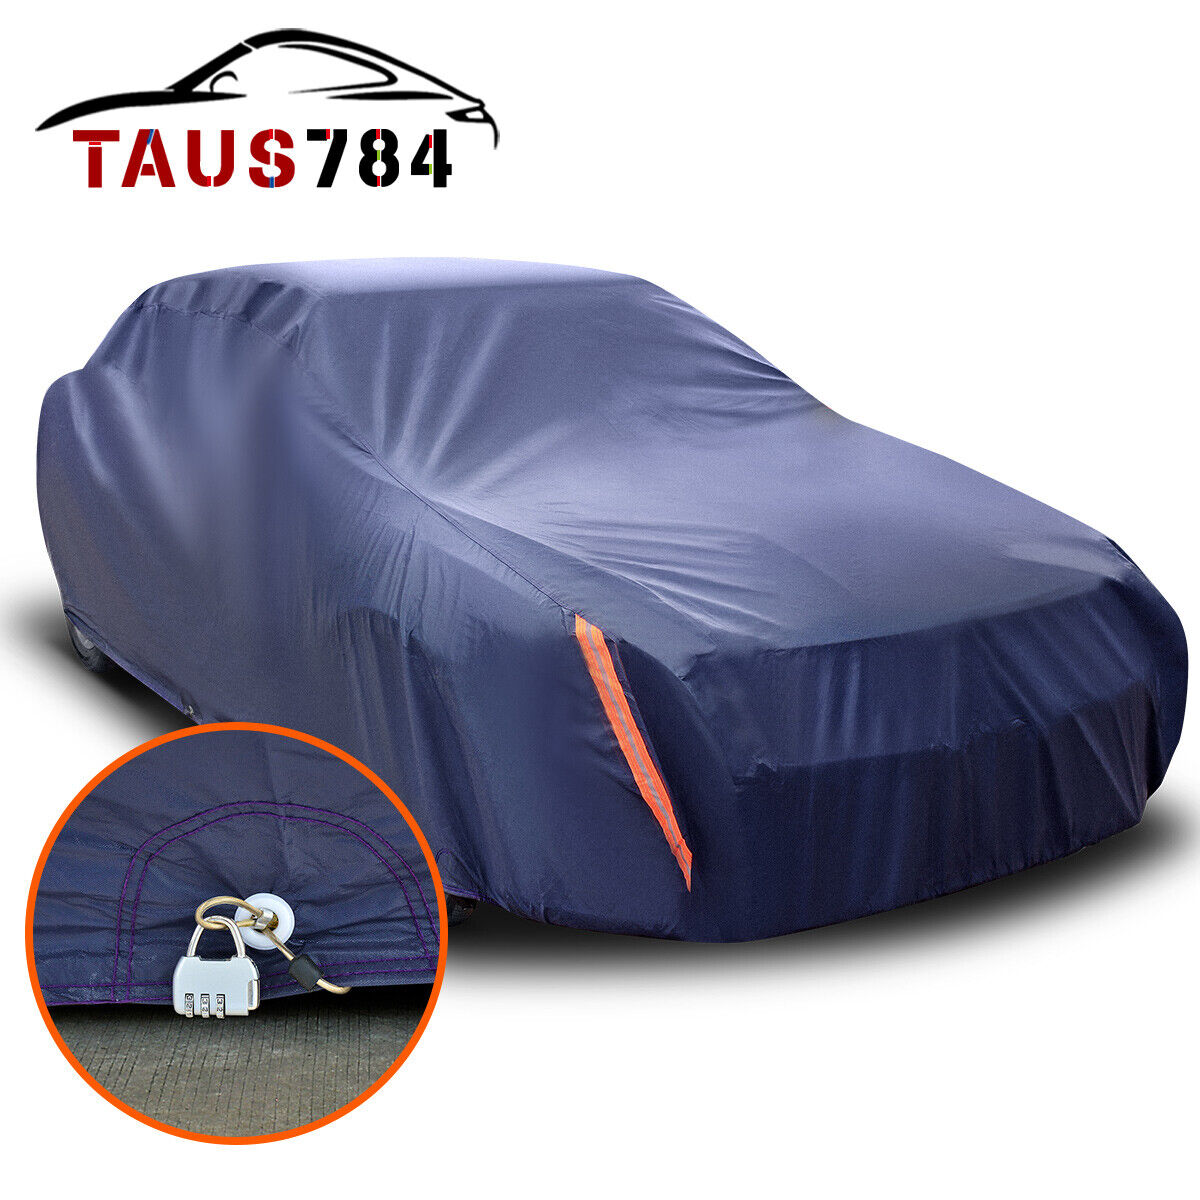 Full Car Cover Waterproof UV Dust Rain Snow Ice Resistant All Weather Protection